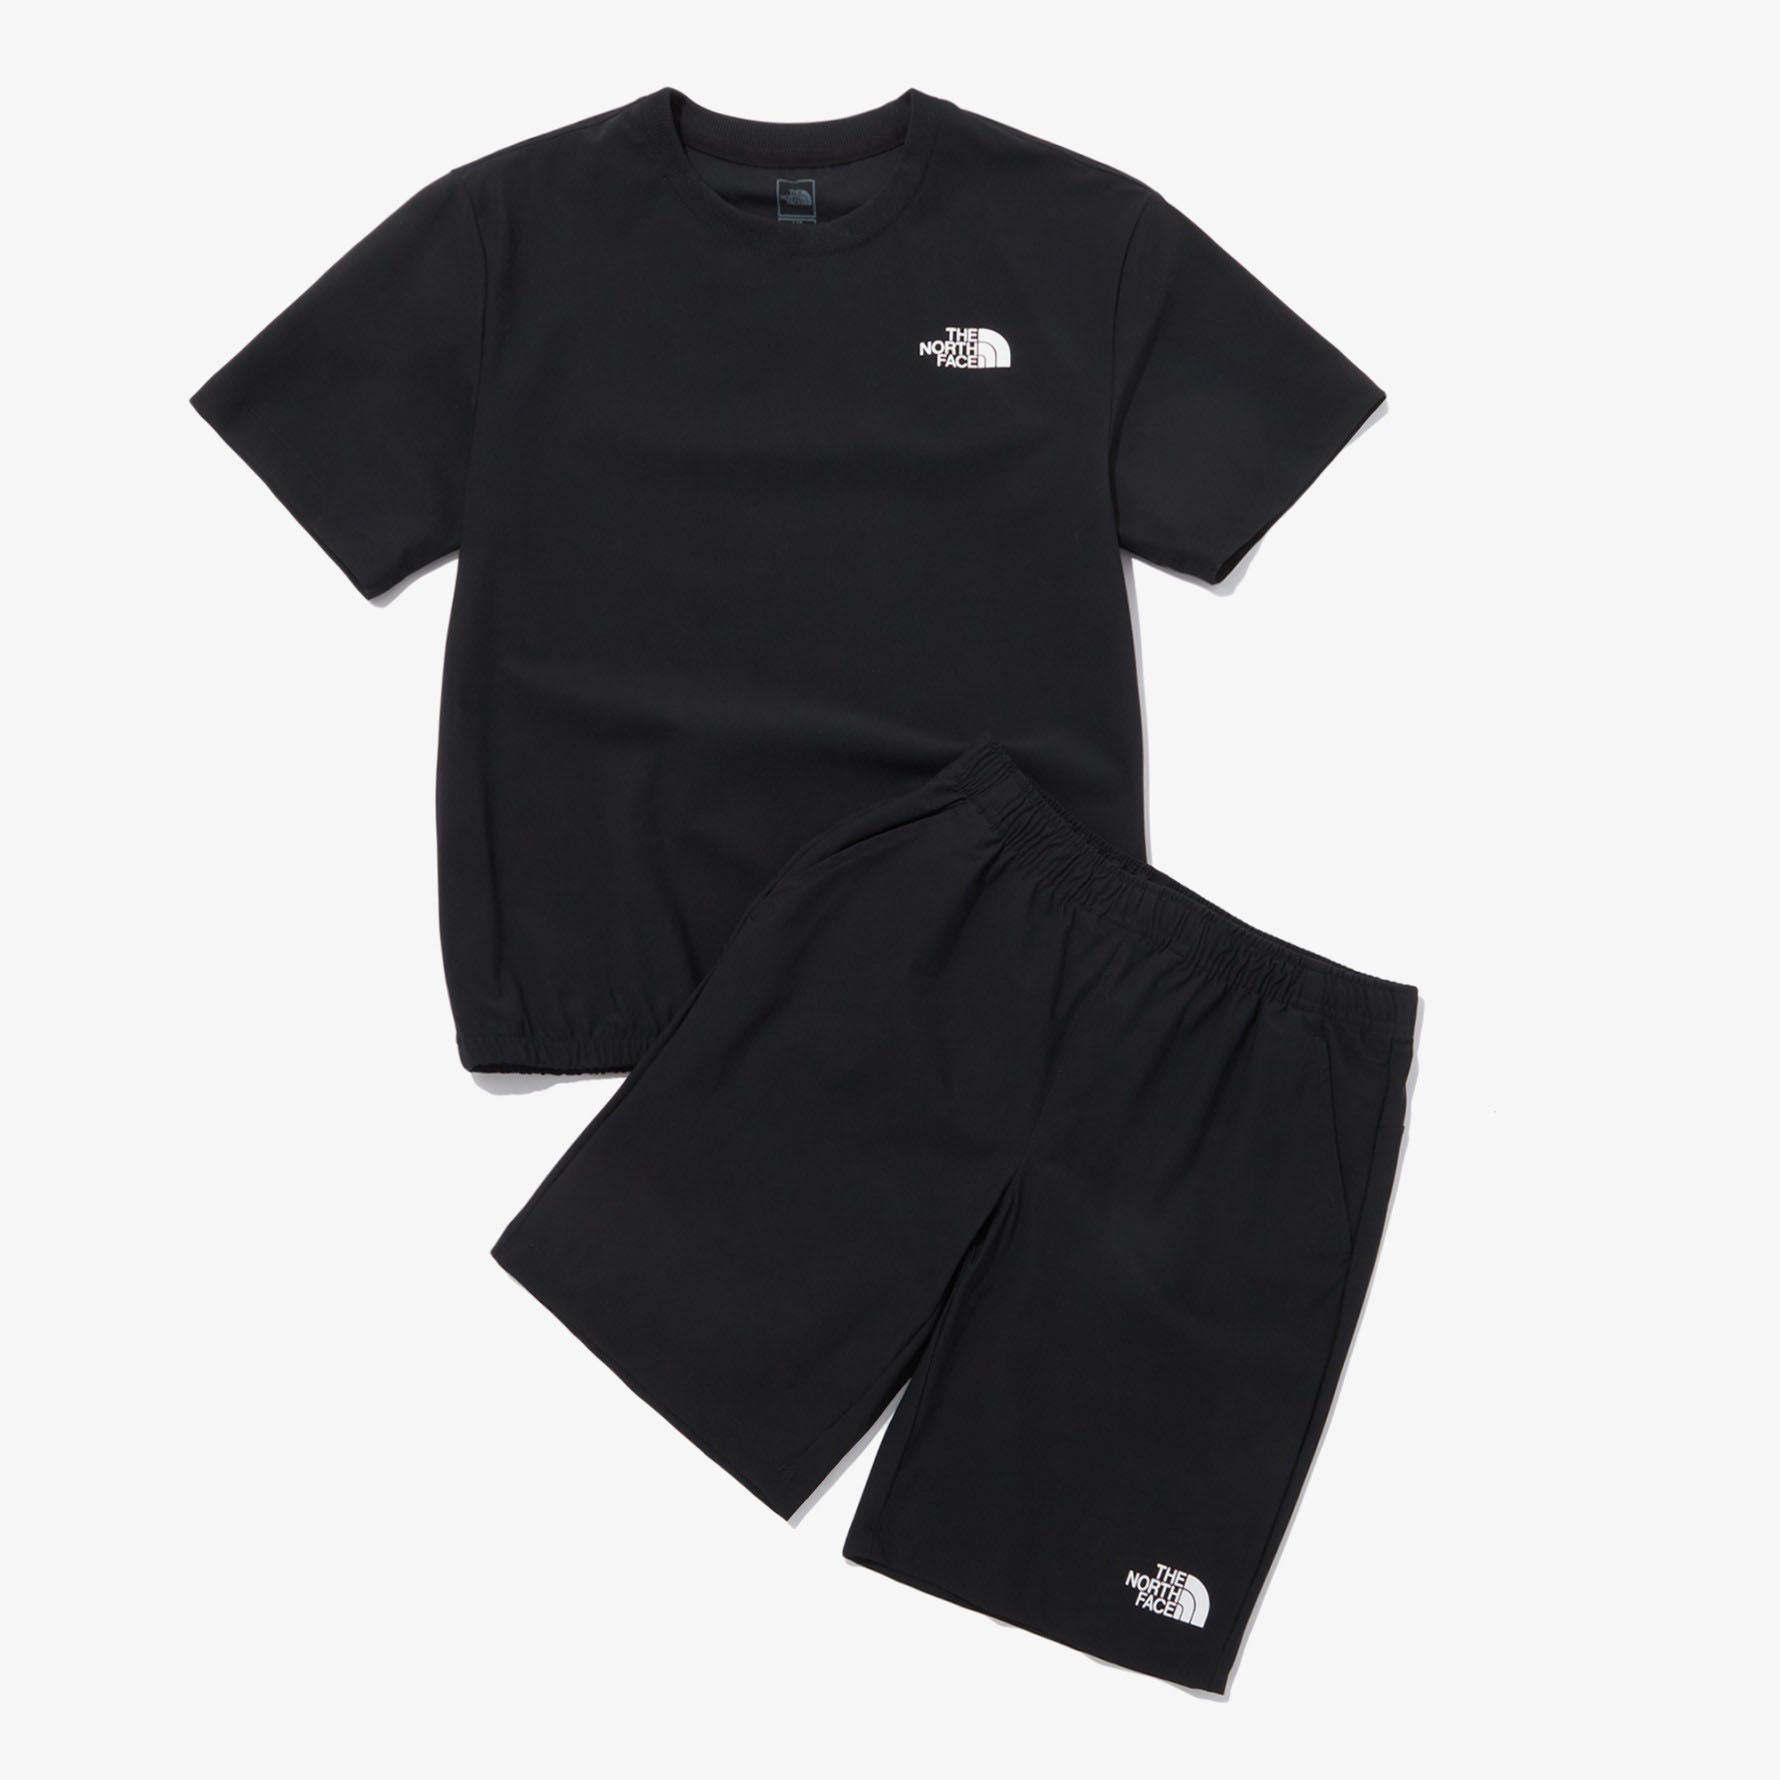 THE NORTH FACE キッズ セットアップ K&apos;S ALL TRAIN CREW SET T...